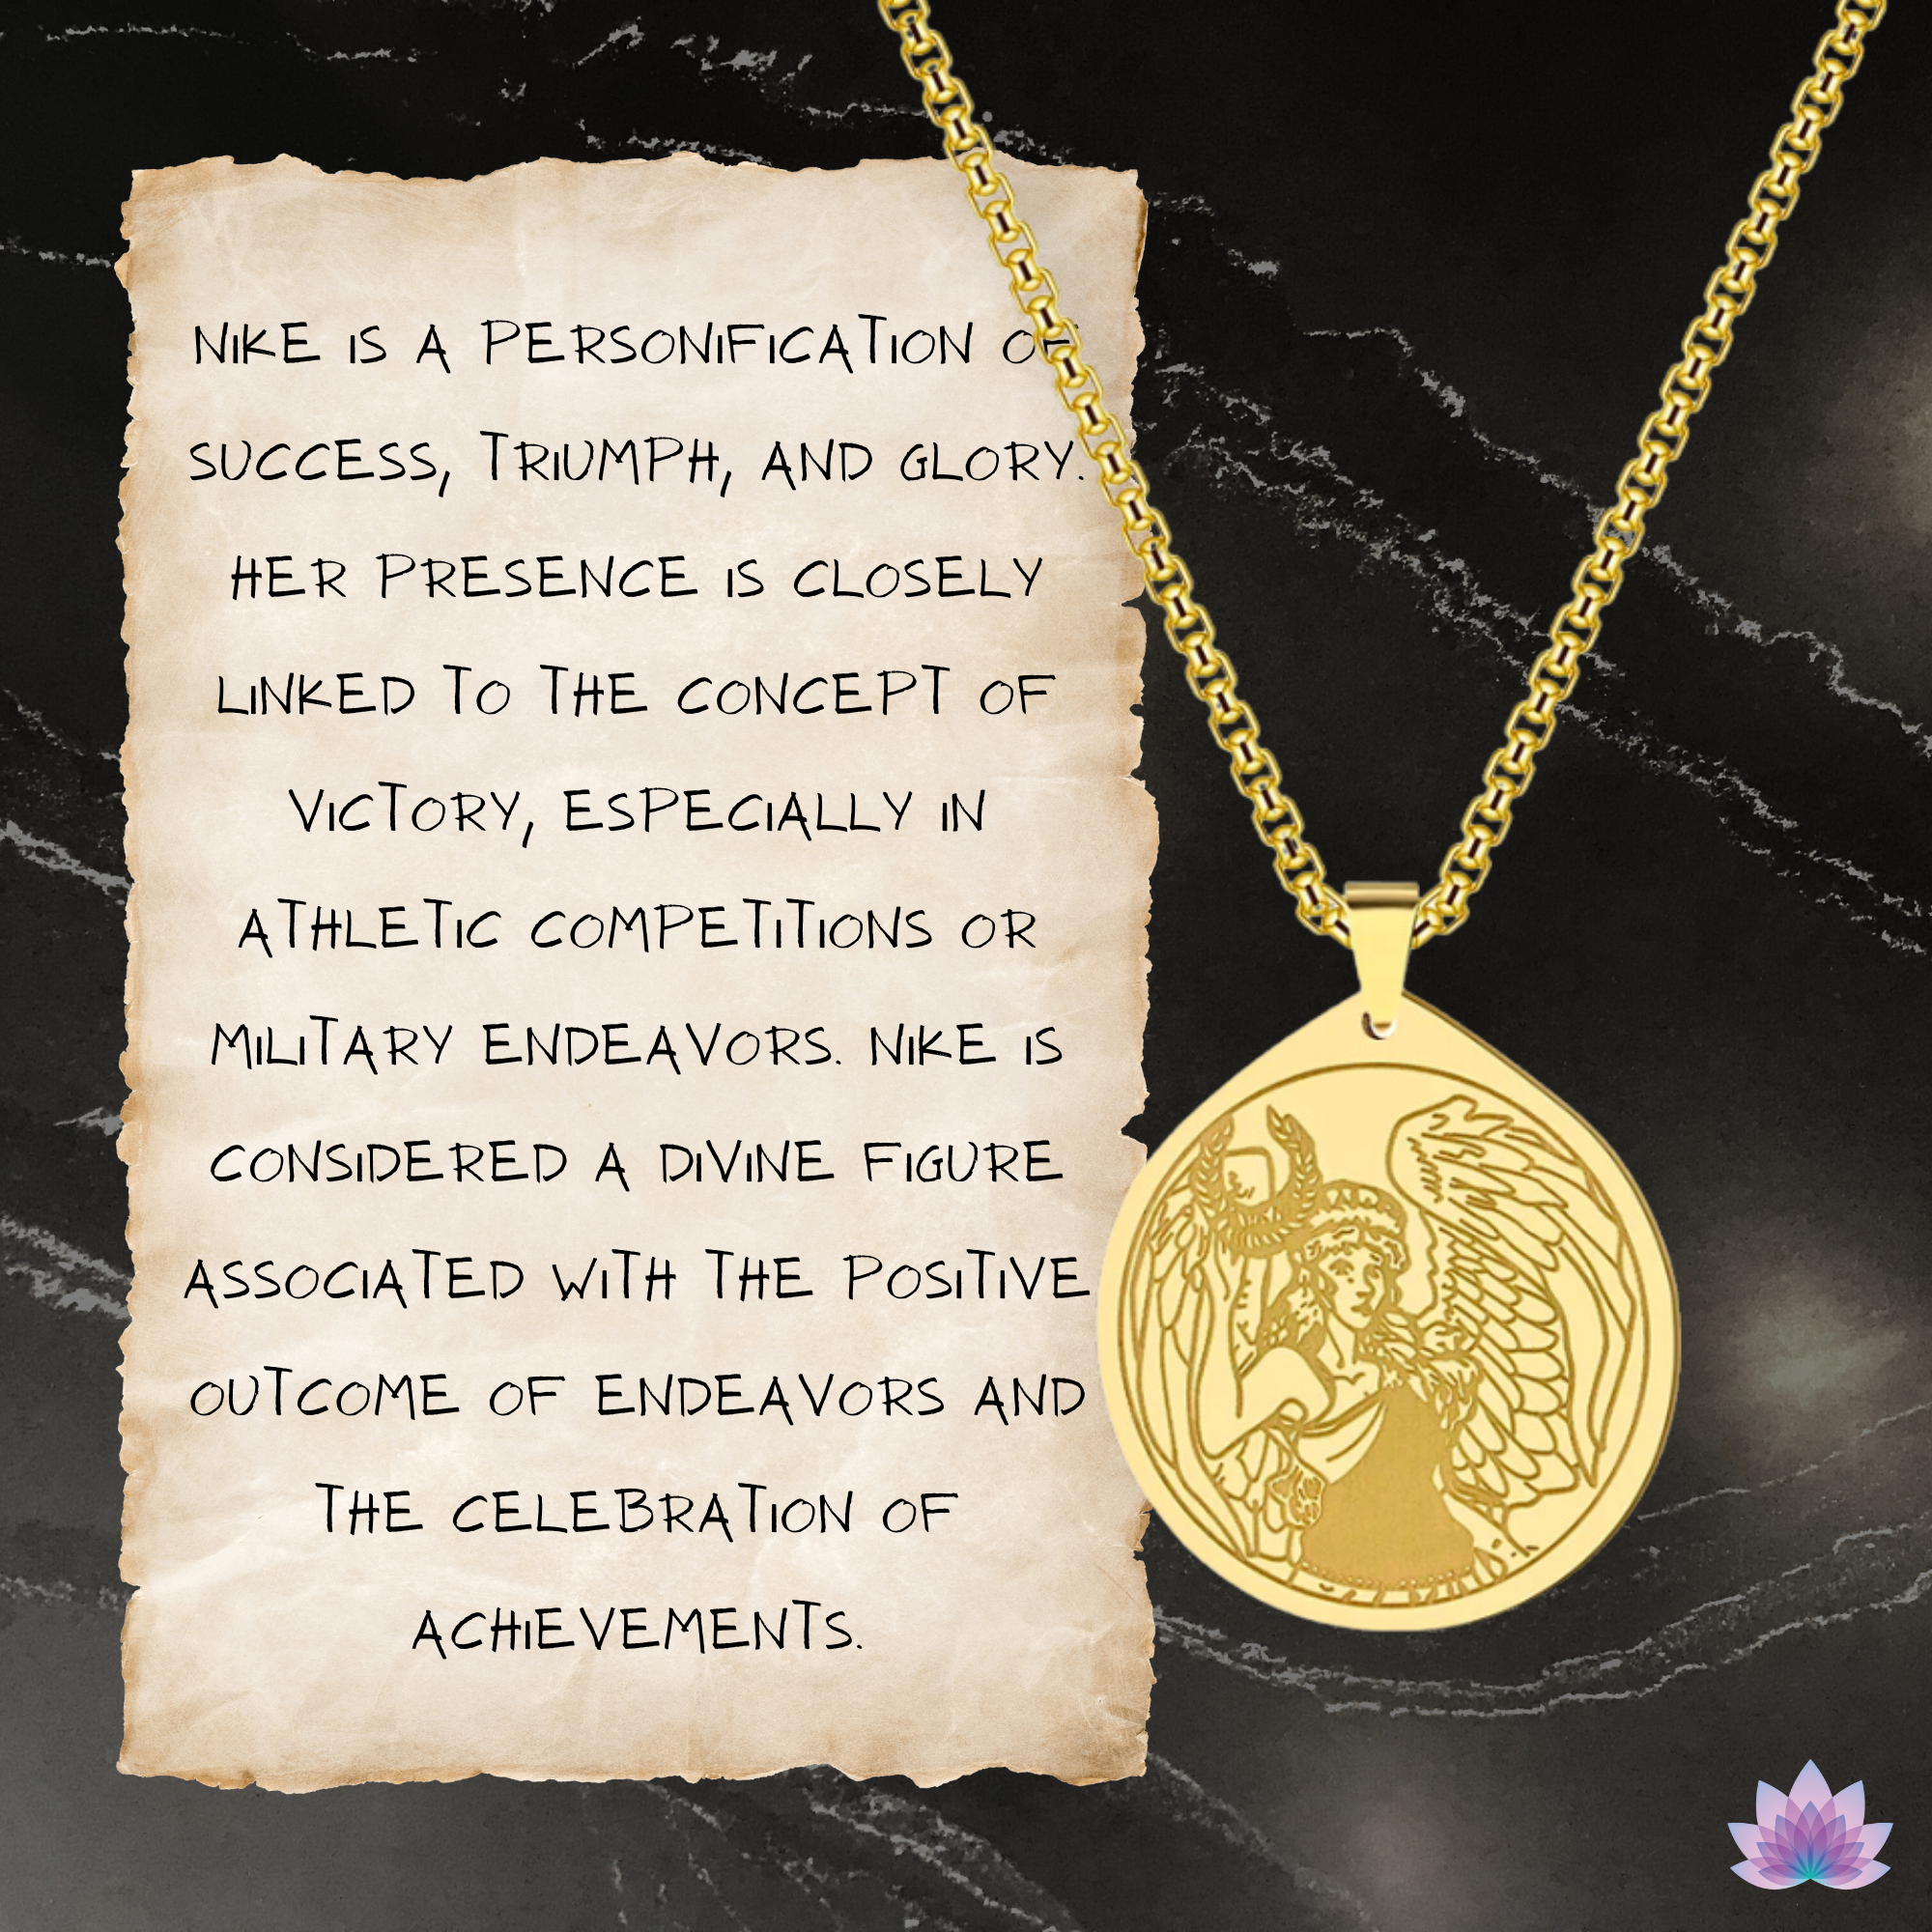 Nike Goddess of Victory Necklace • Pagan Worship Greek Mythology Amulet For Success Triumph Glory • Championship Winner Jewelry Gift Medal • Apollo Tarot Online Shop